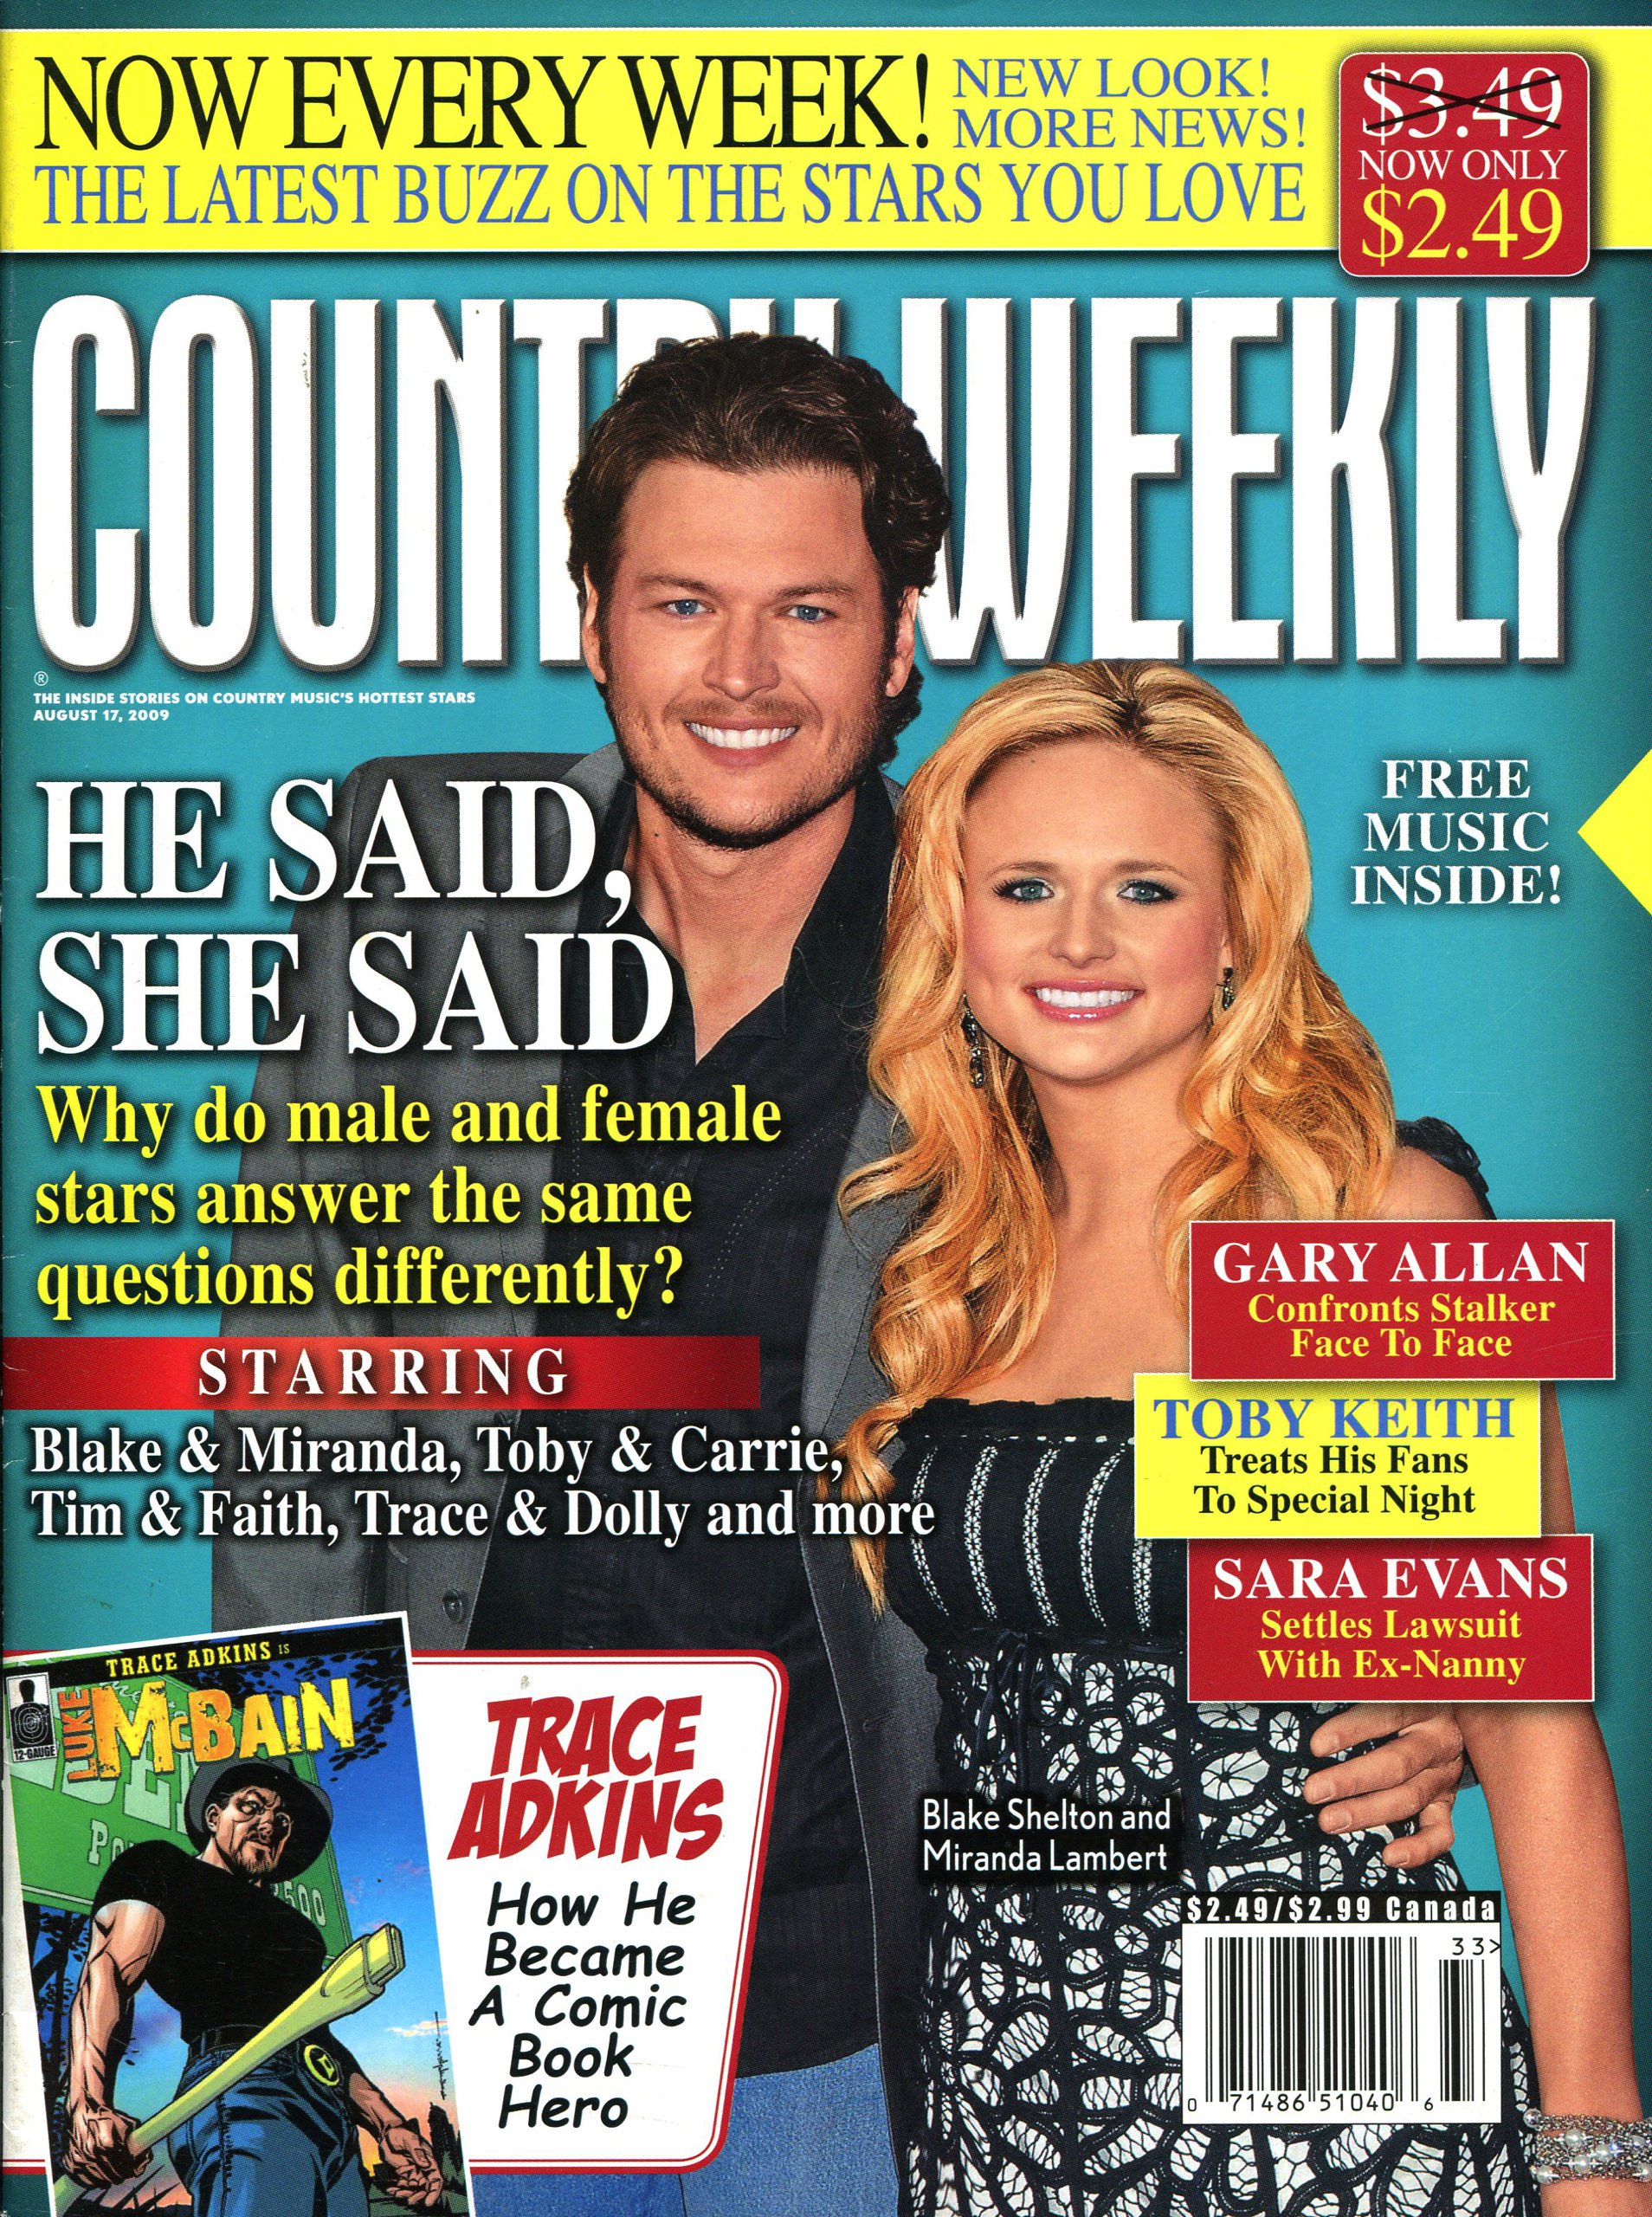 Country Weekly - Aug. 17th 2009